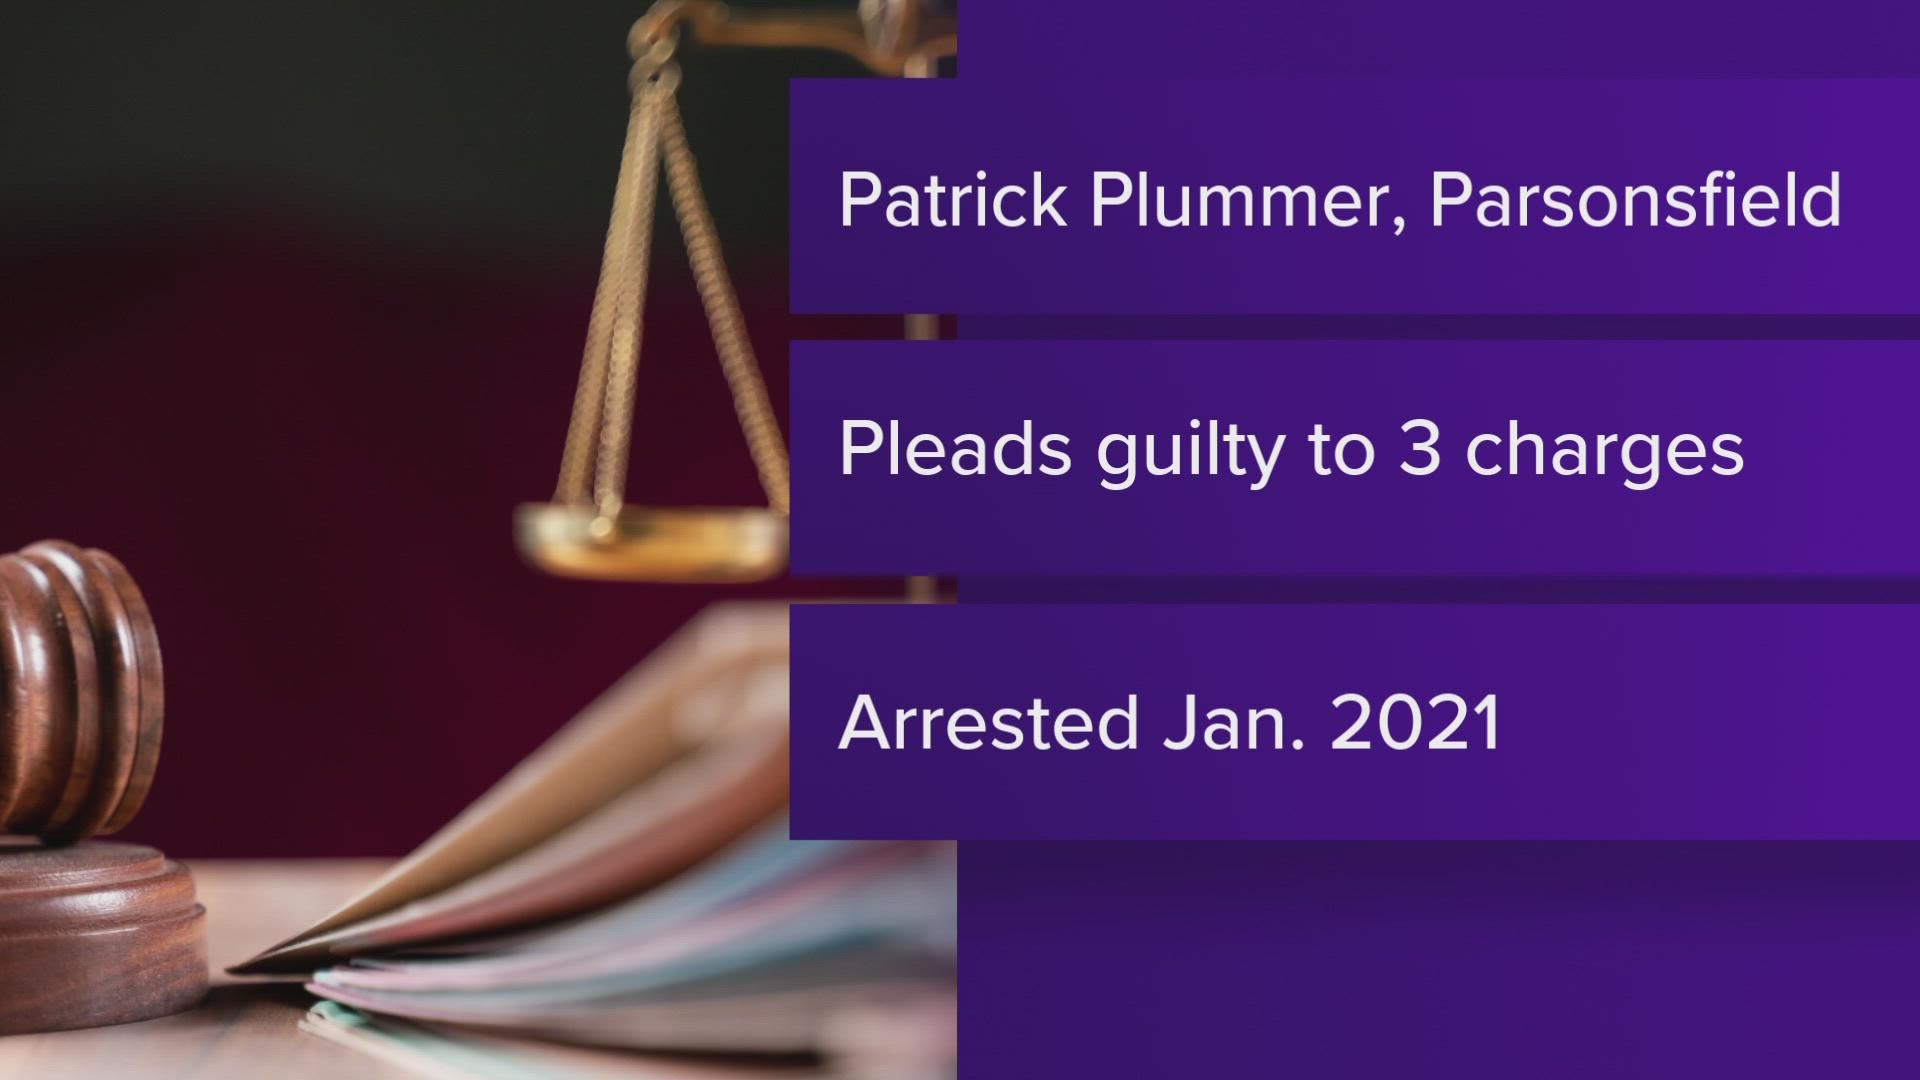 The Maine man was arrested and charged by criminal complaint back in January of 2021 and indicted in February of 2021.